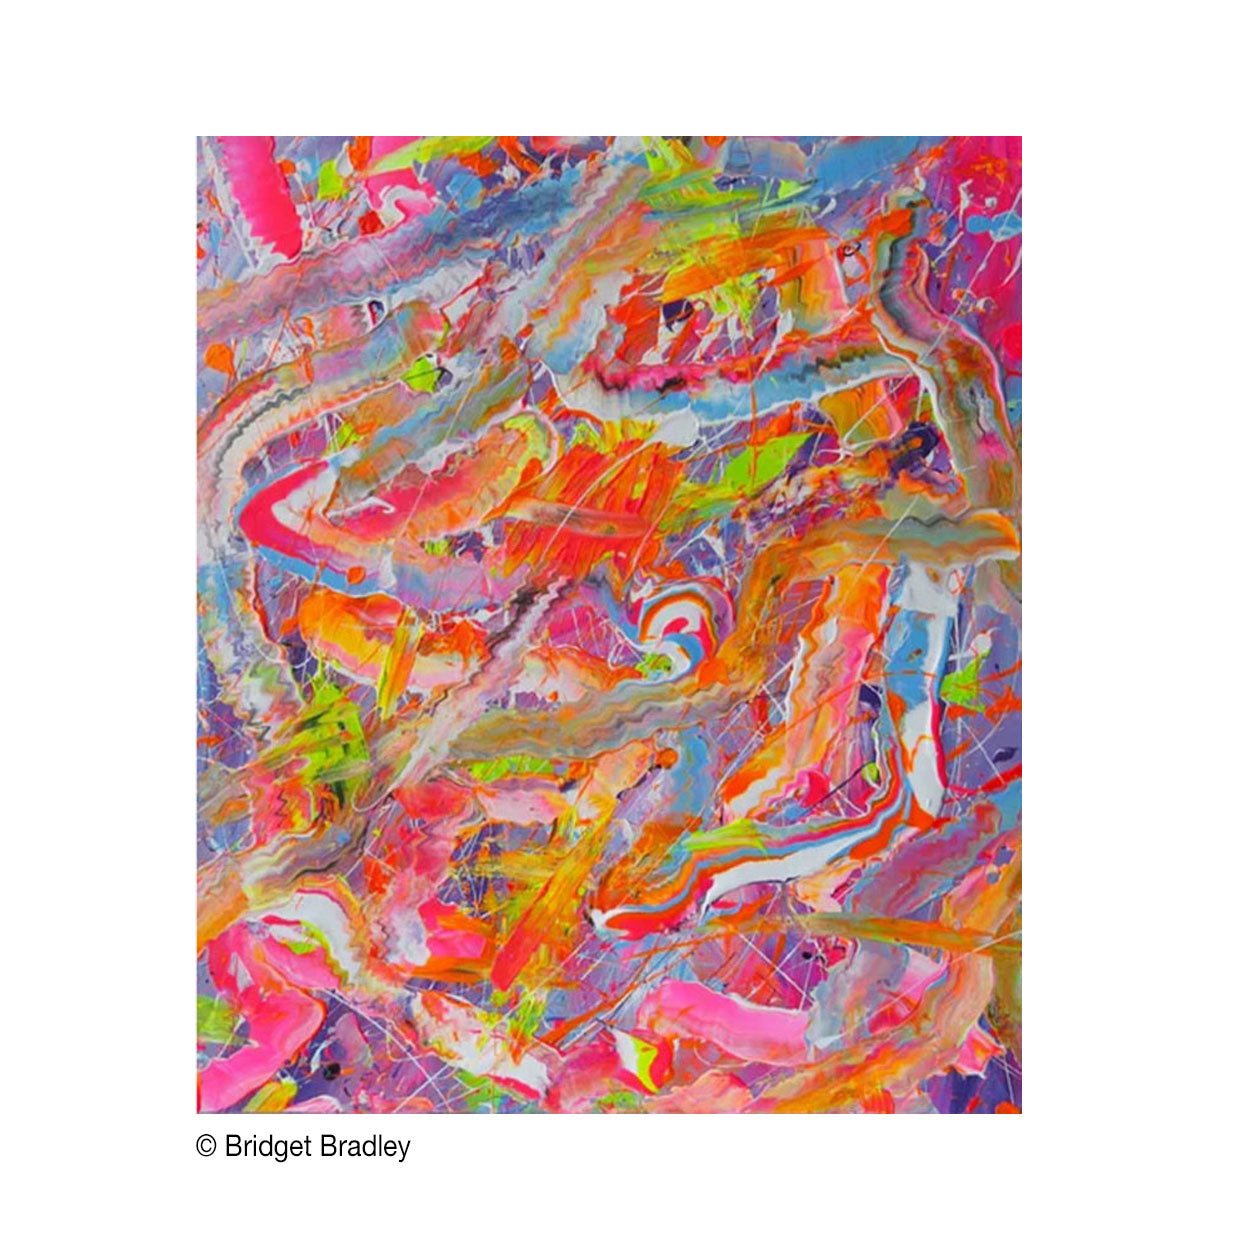 As seen in Edge of Humanity Magazine,Image of original painting, 'Candyland' from the series by Bridget Bradley, abstract expressionism artist.